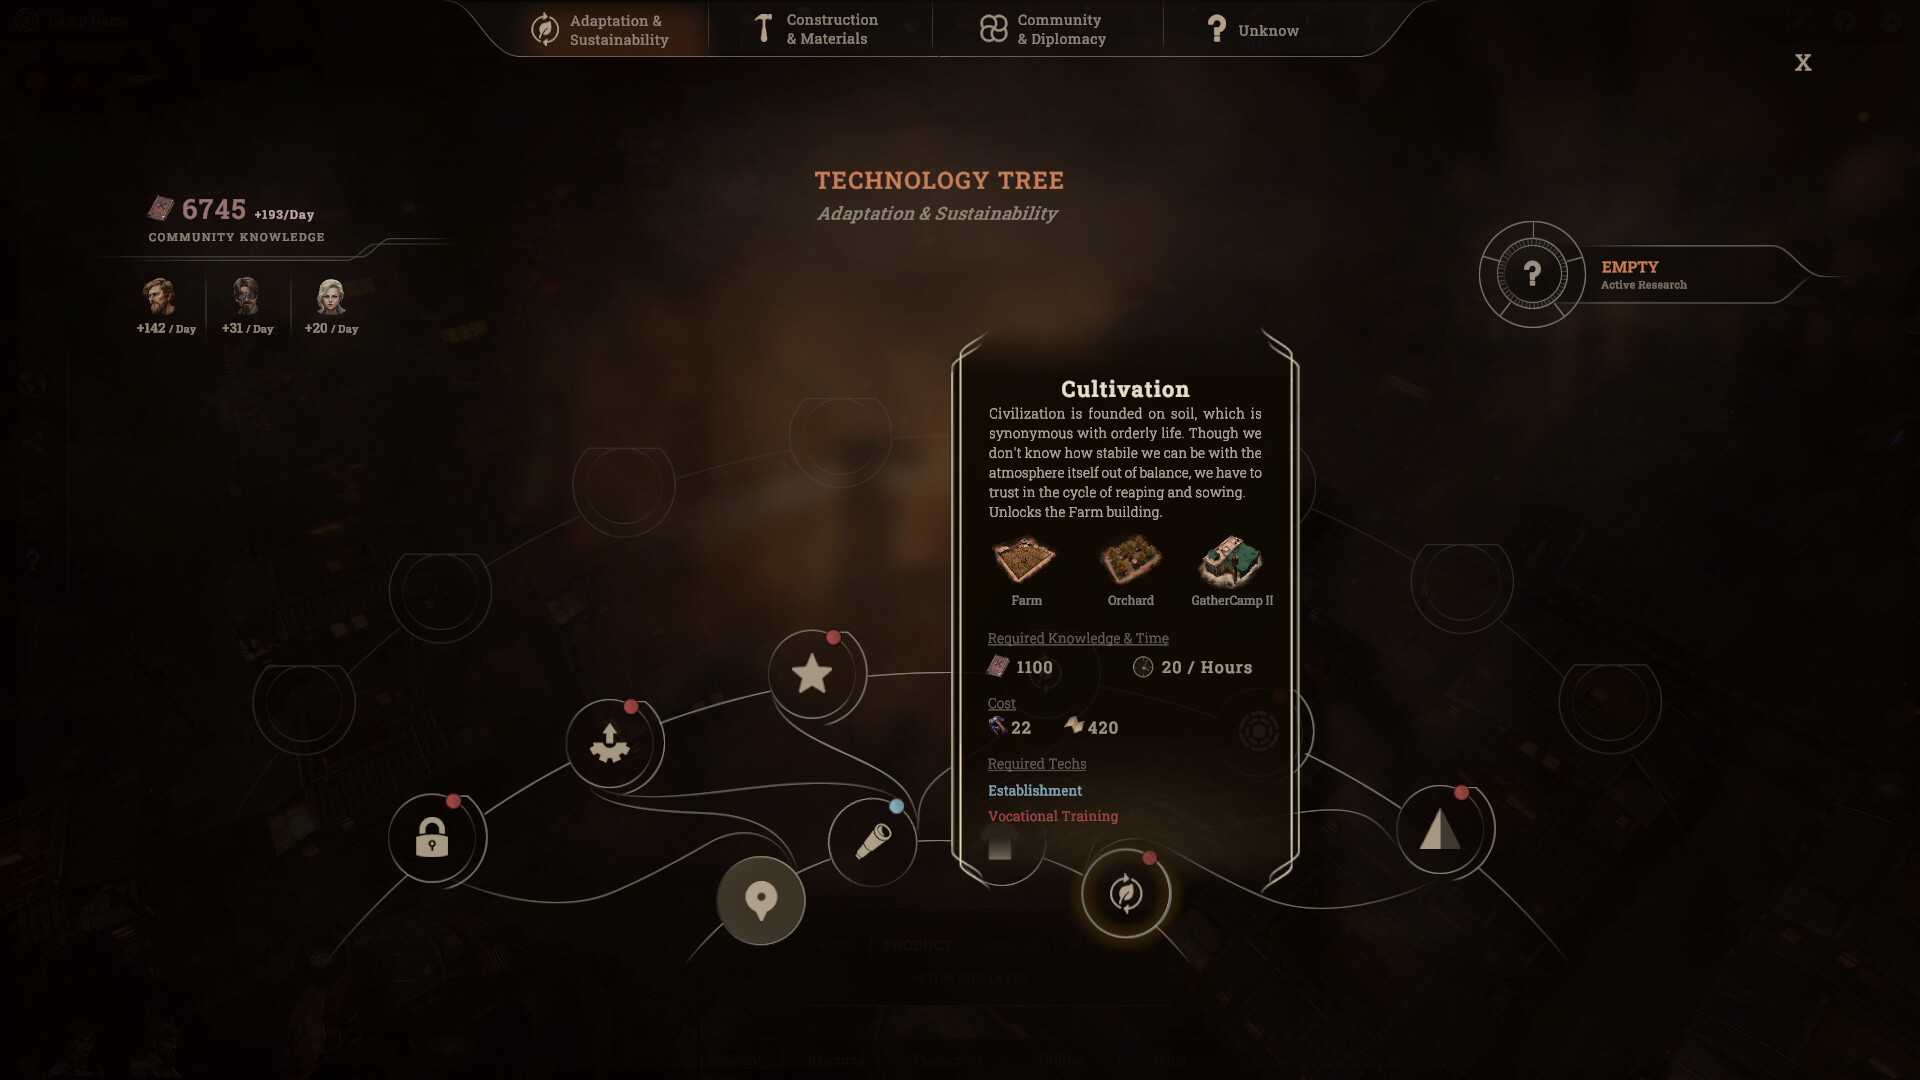 Technology tree in New Cycle